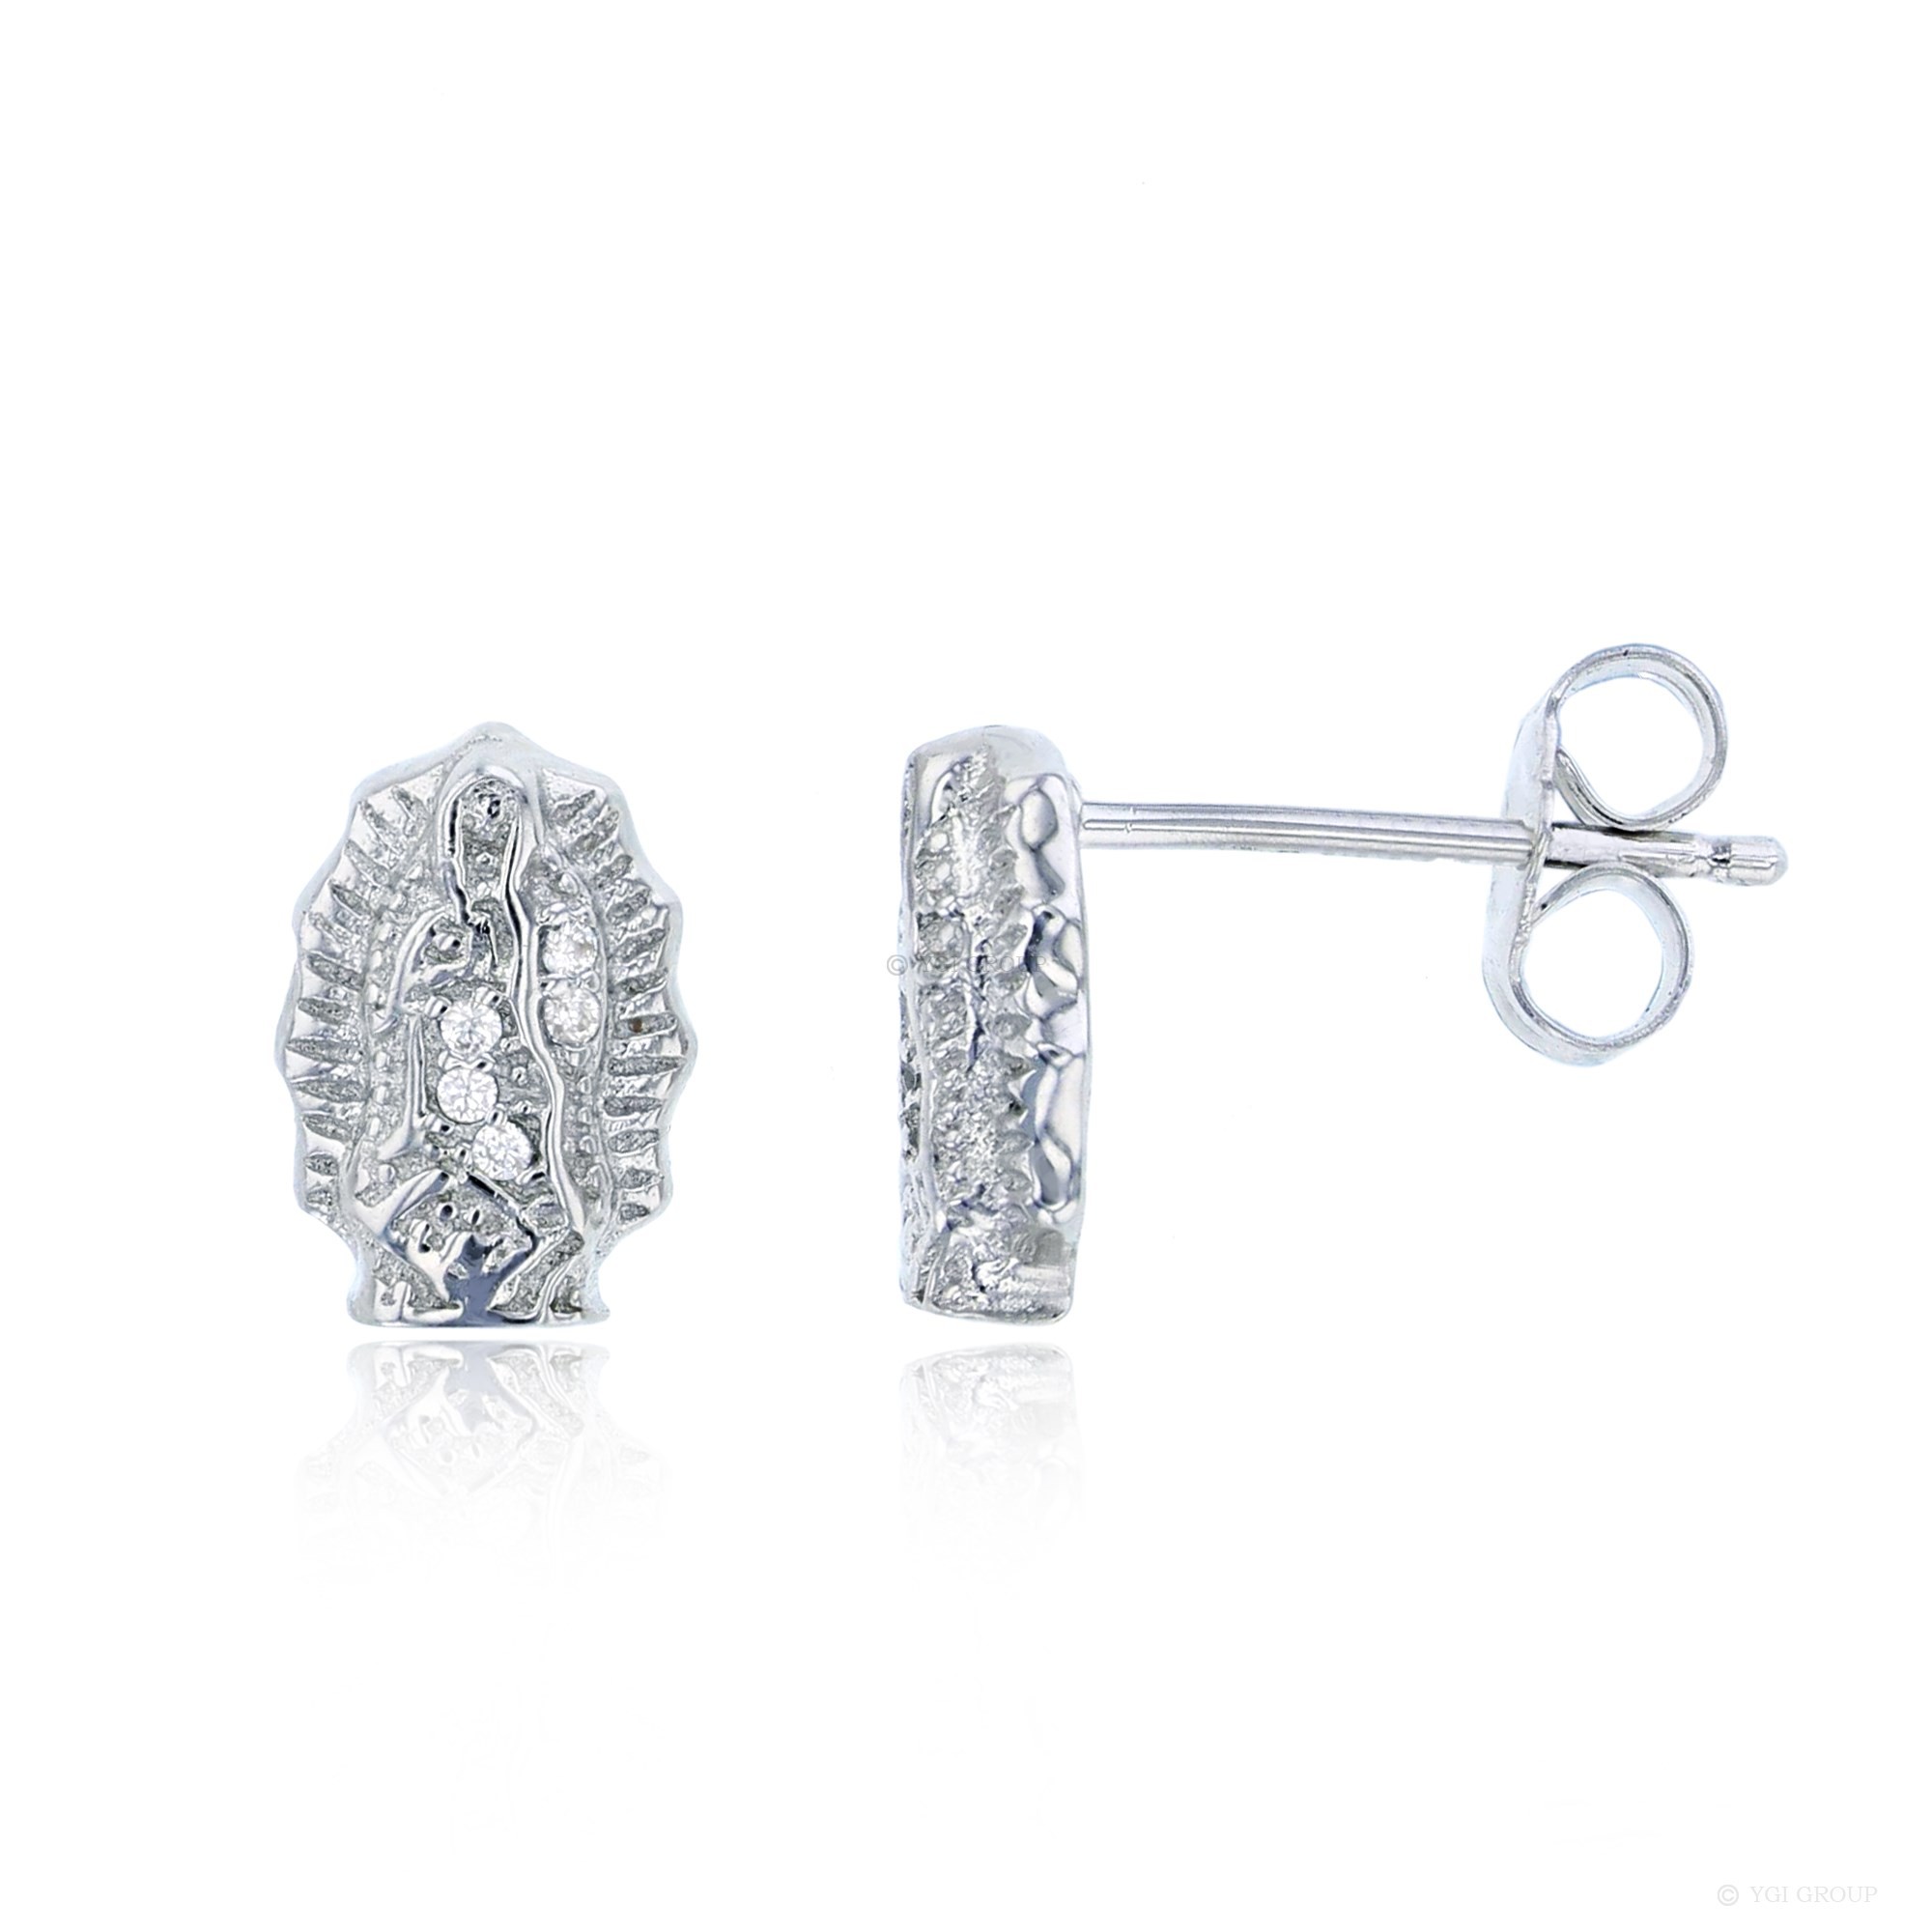 Sterling Silver Rhodium Plated Micropave Virgin Mary Stud Earring With CZ